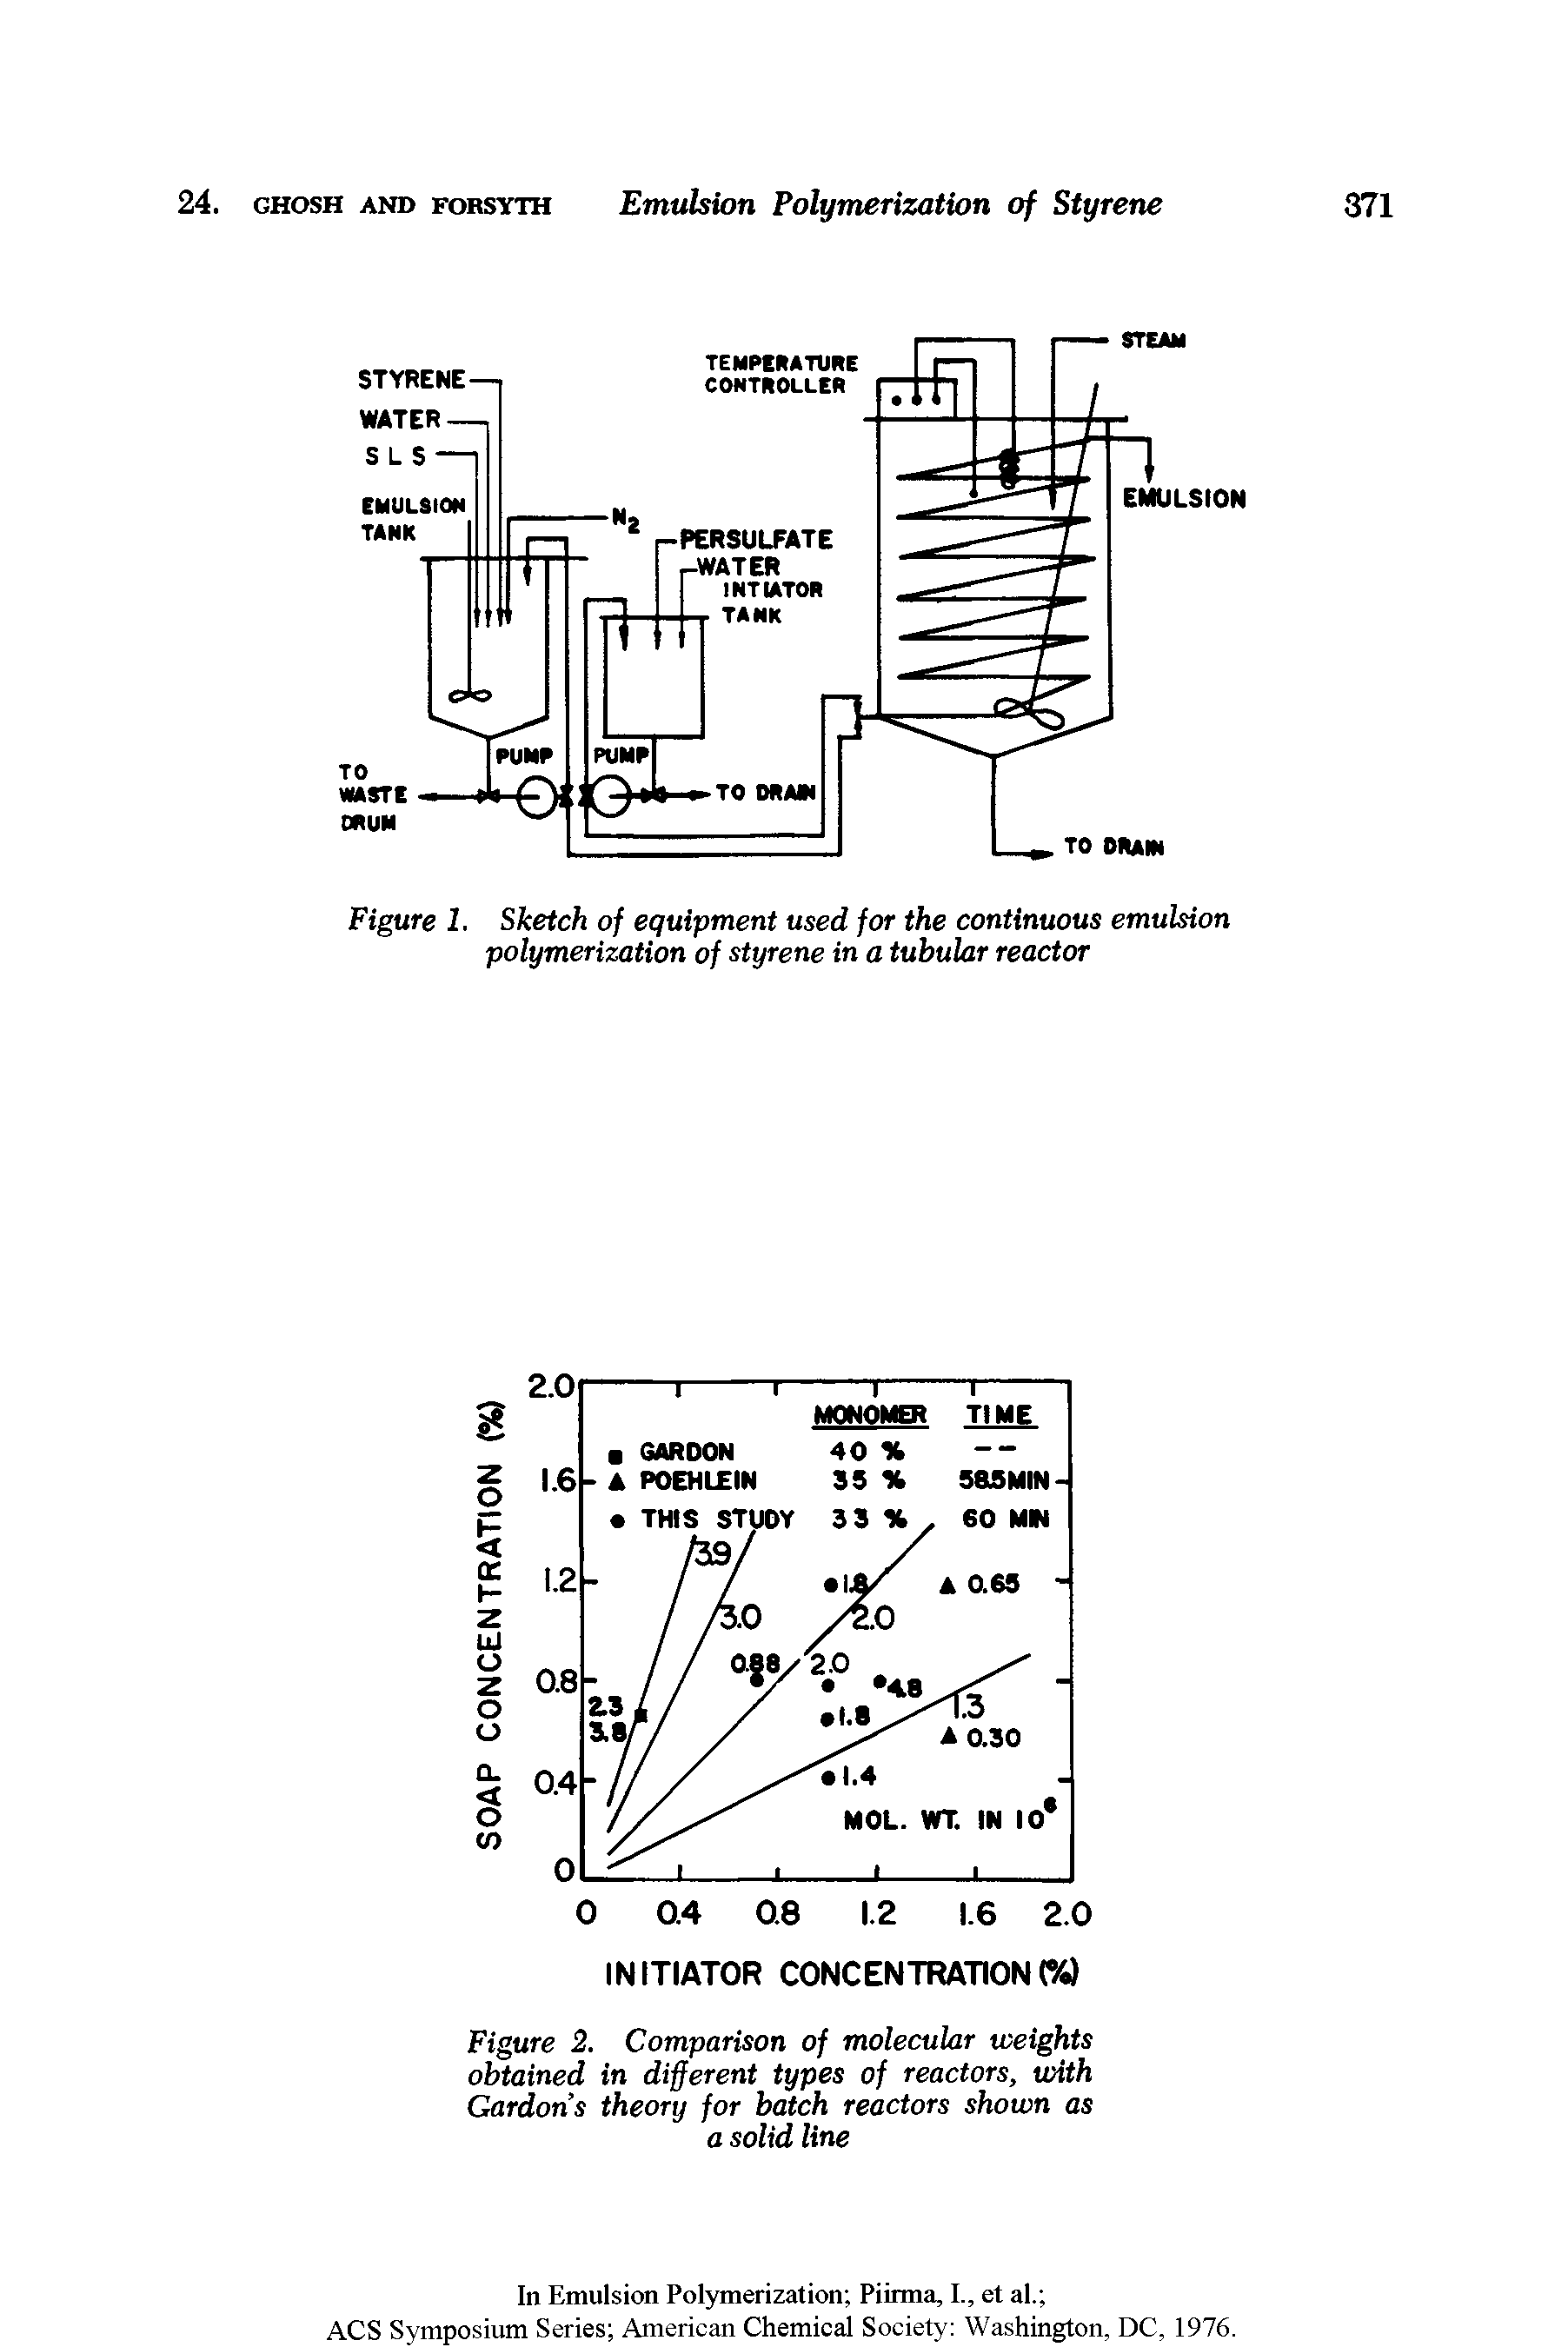 Figure 1. Sketch of equipment used for the continuous emulsion polymerization of styrene in a tubular reactor...